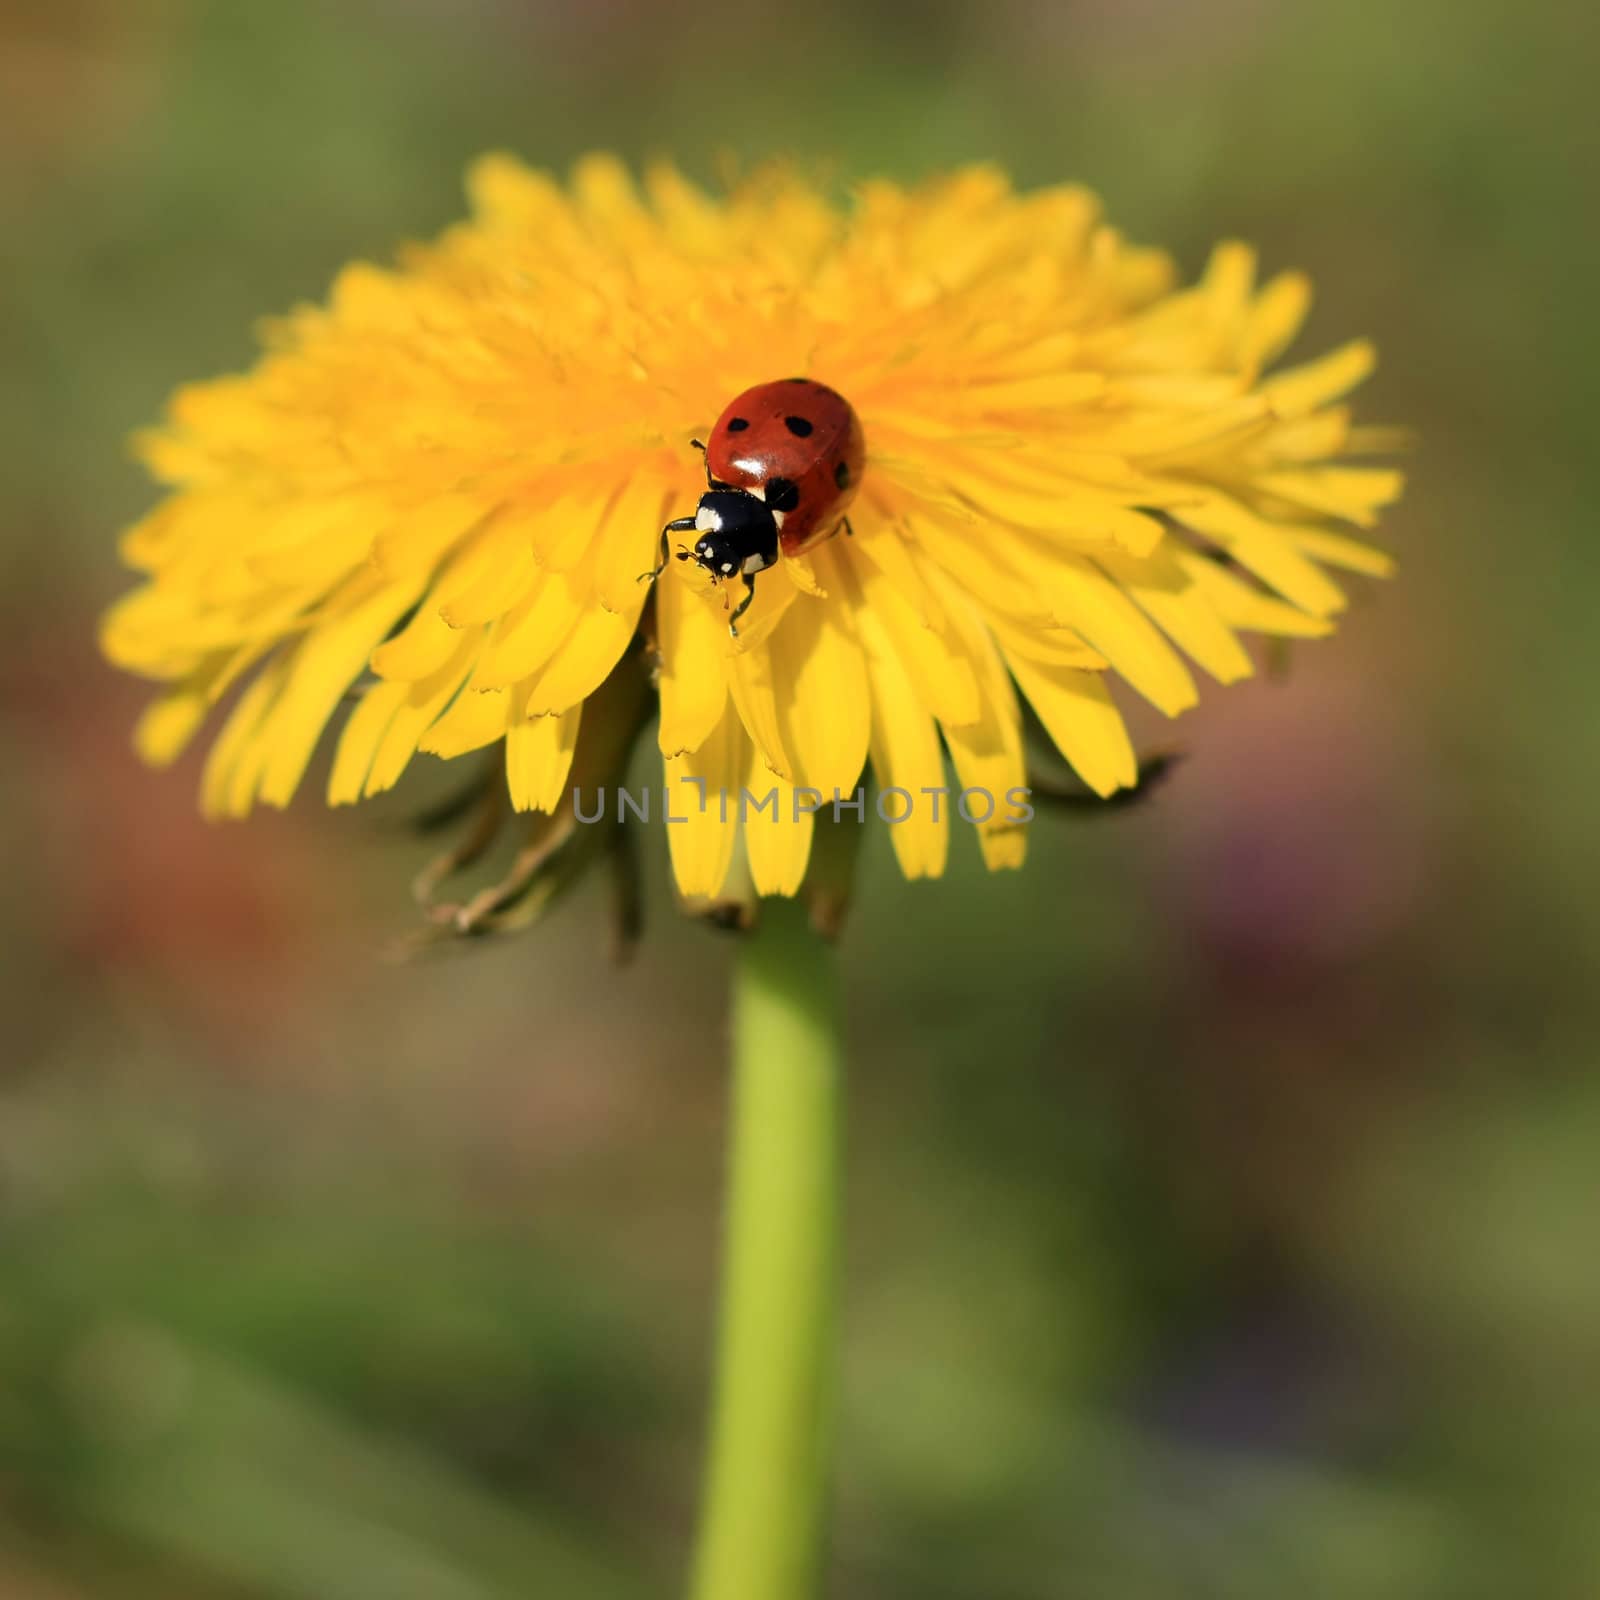 Ladybug on a Yellow Flower by monner